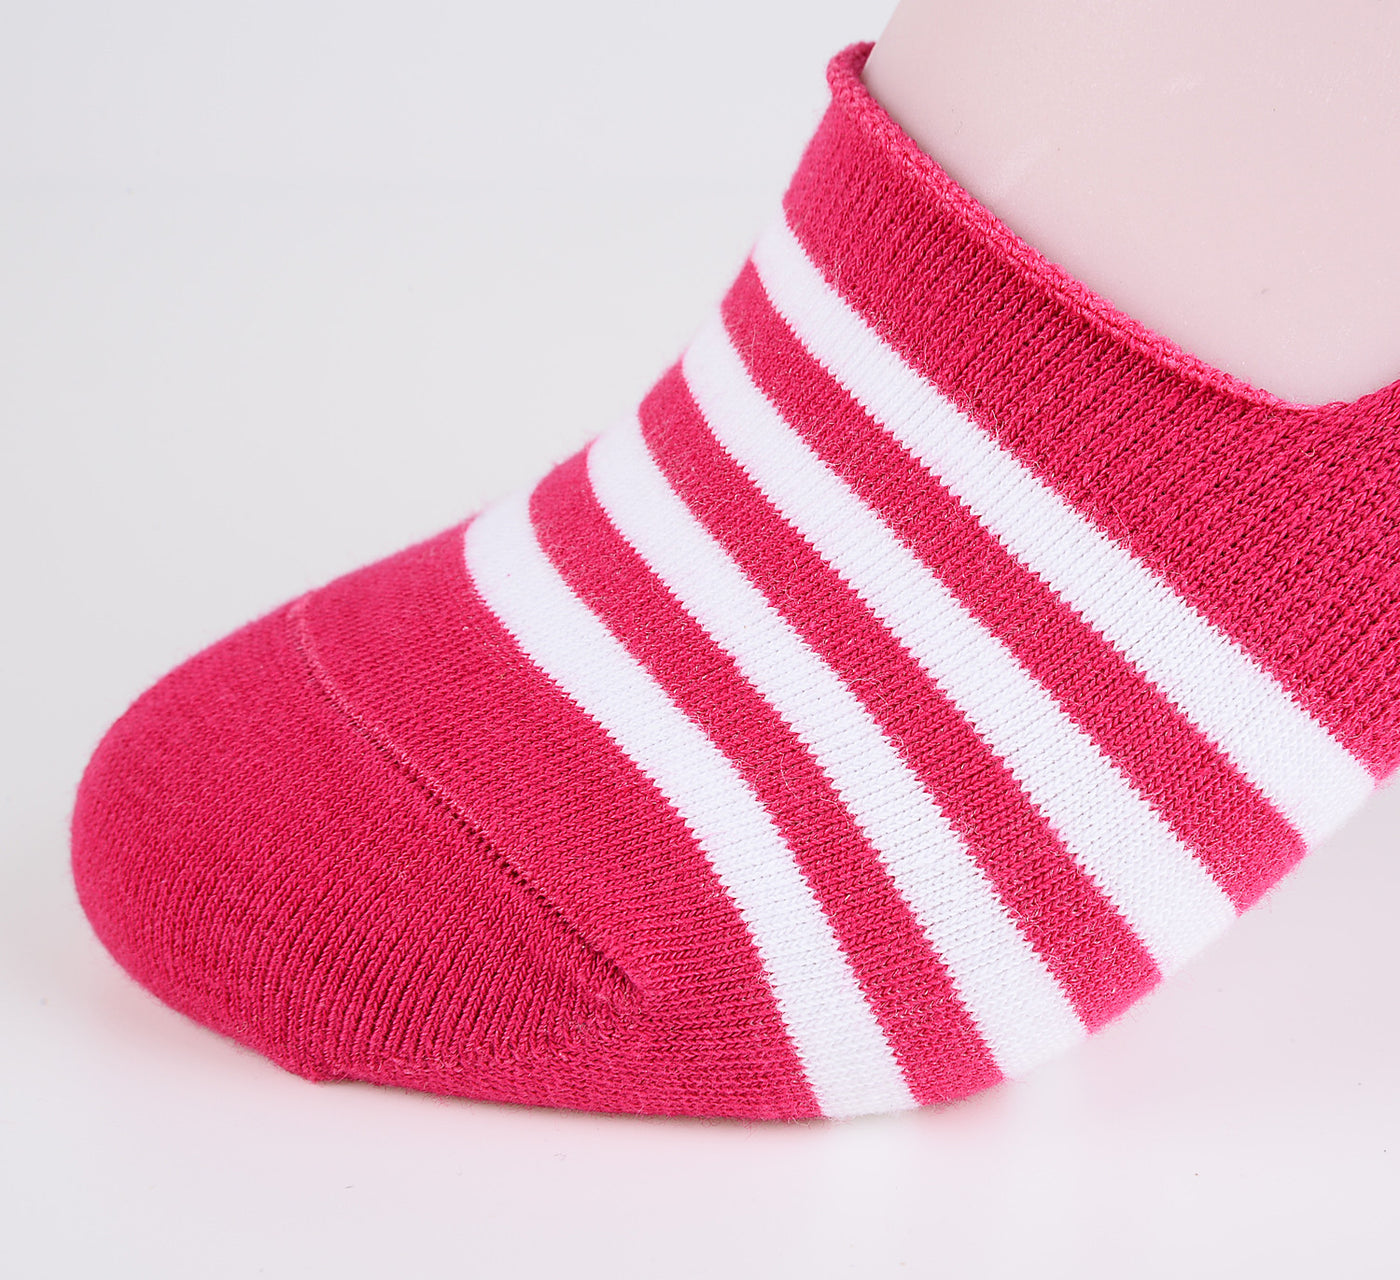 2 Pairs Finest Combed Cotton Invisible Socks Striped - Cerise